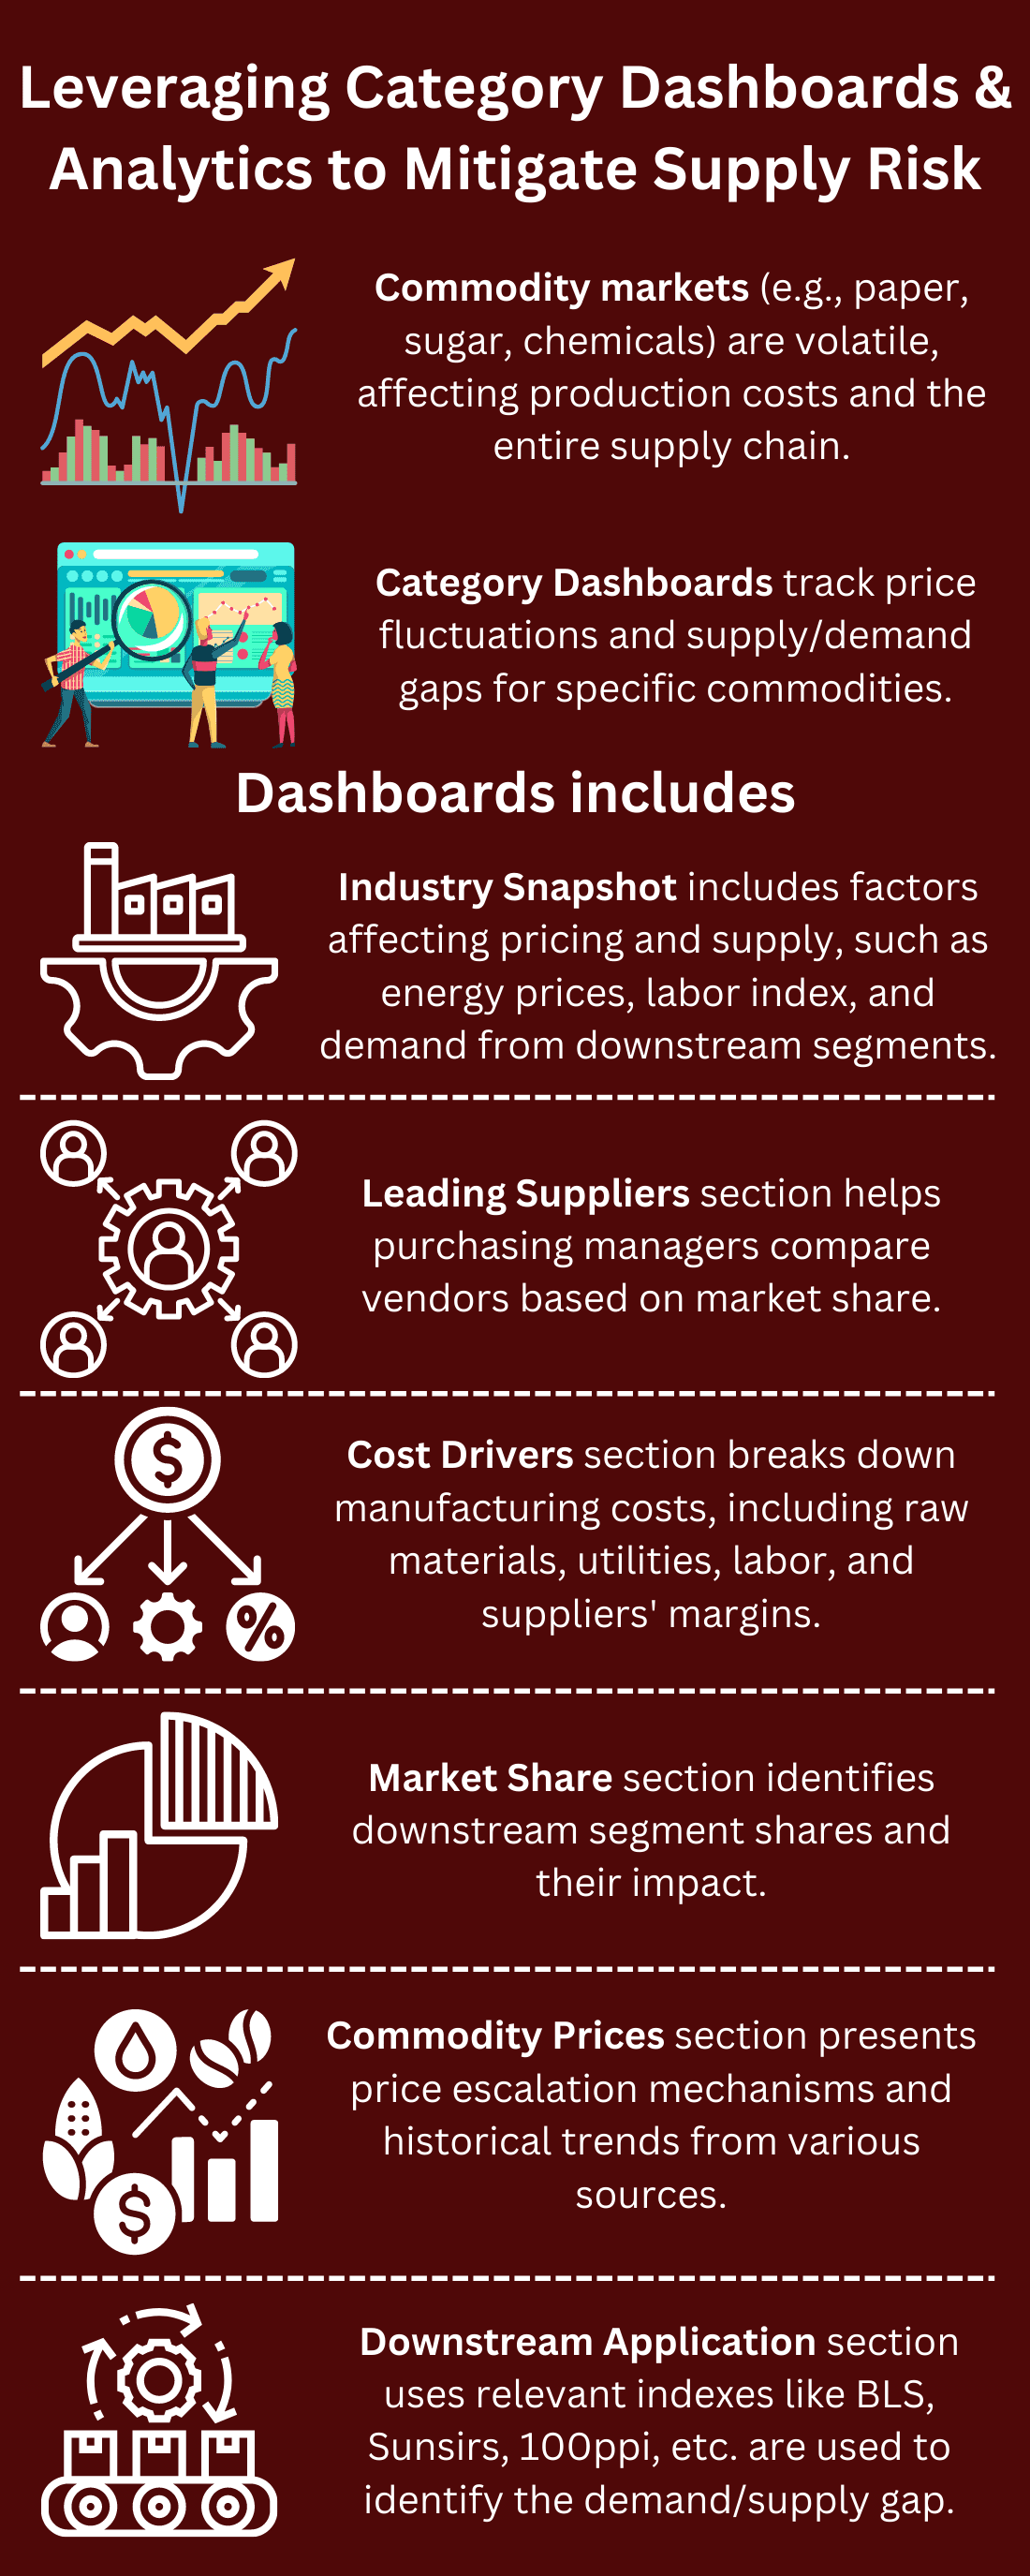 An infographic on 'Leveraging Category Dashboards & Analytics to Mitigate Supply Risk', detailing the volatility of commodity markets and how dashboards can provide insights on price fluctuations, supply/demand gaps, and other key metrics.